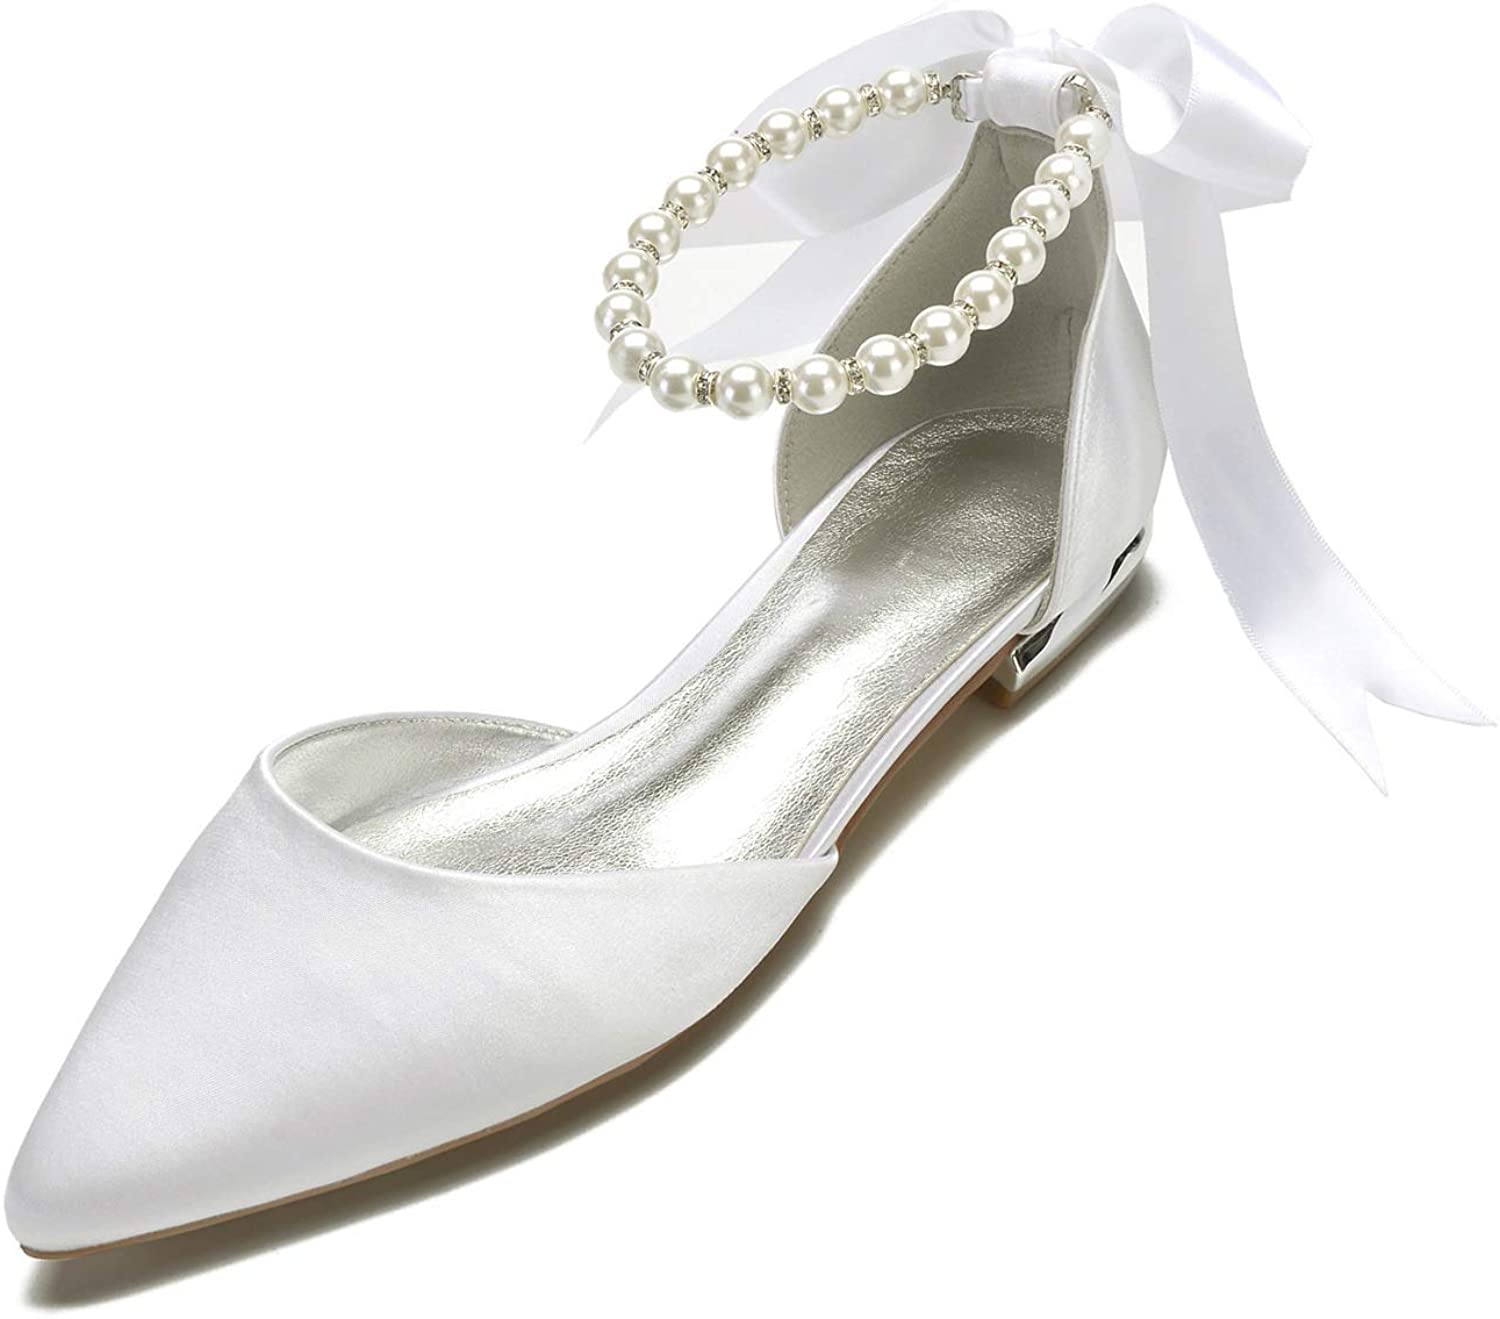 Most Comfortable Bridal Shoes for Outdoor Wedding: LLBubble Satin Pearl Flats